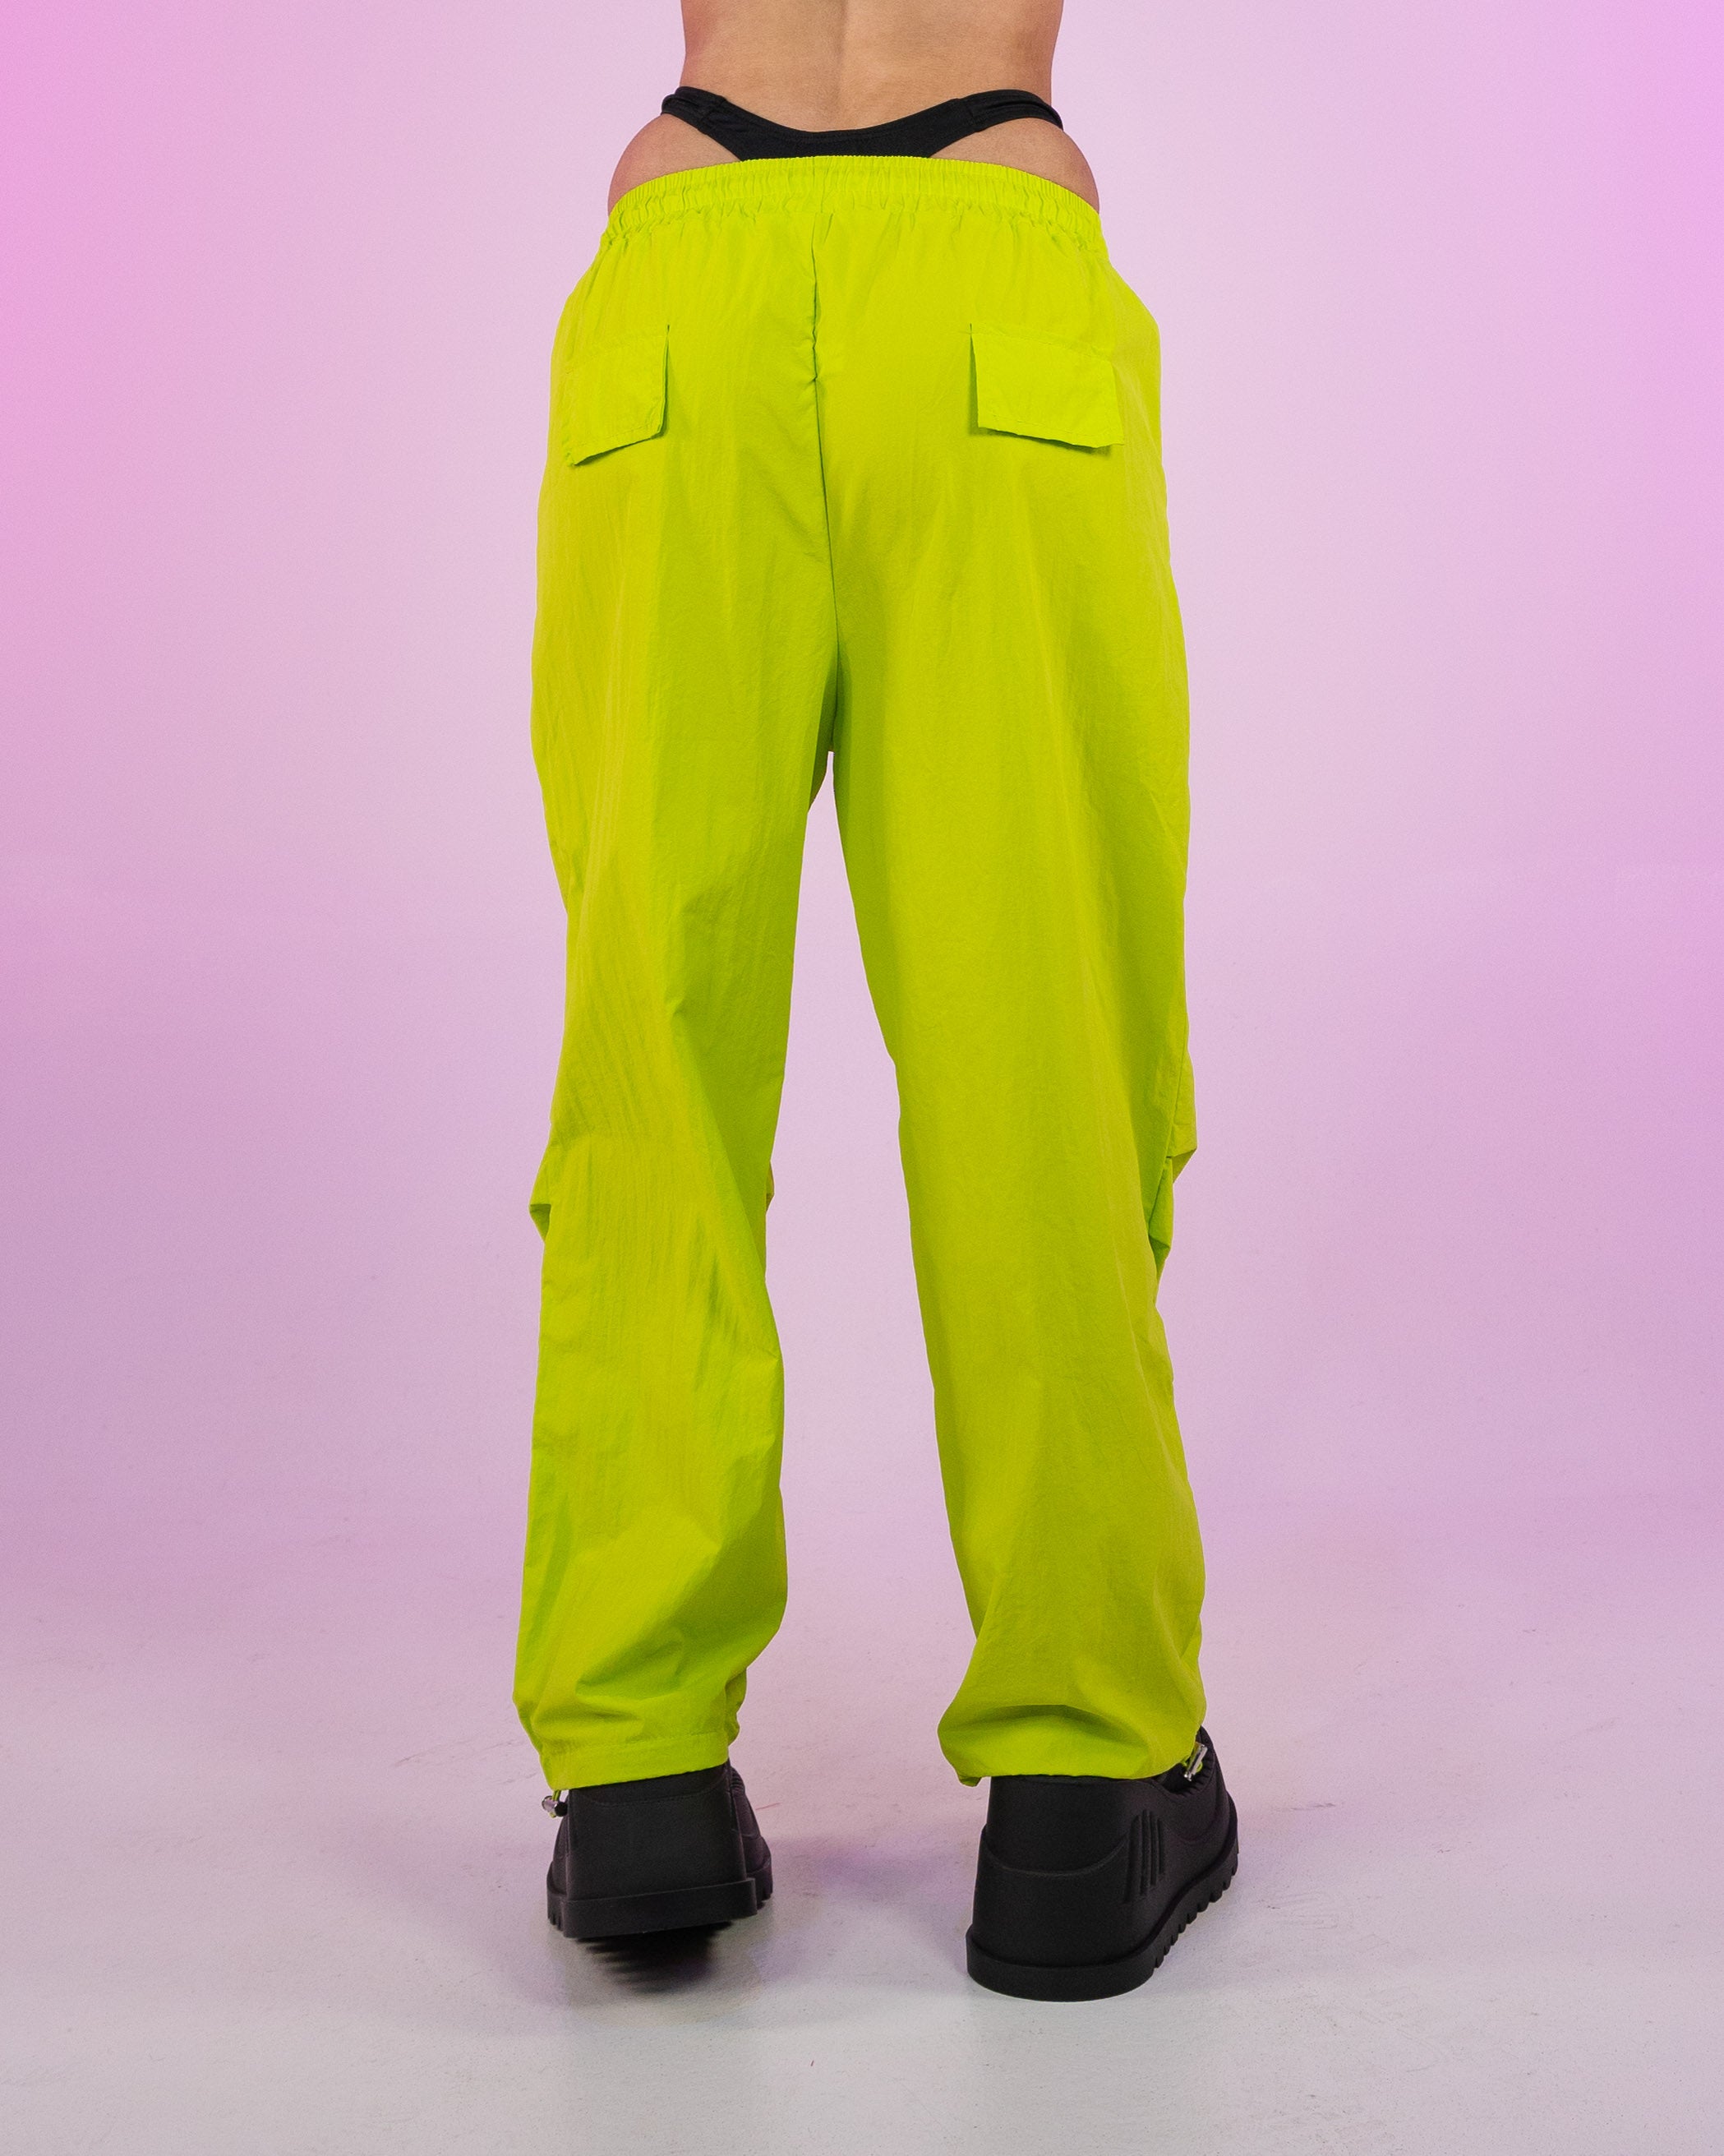 Men's Lime Green Hippie Bell Bottom Pants - Candy Apple Costumes